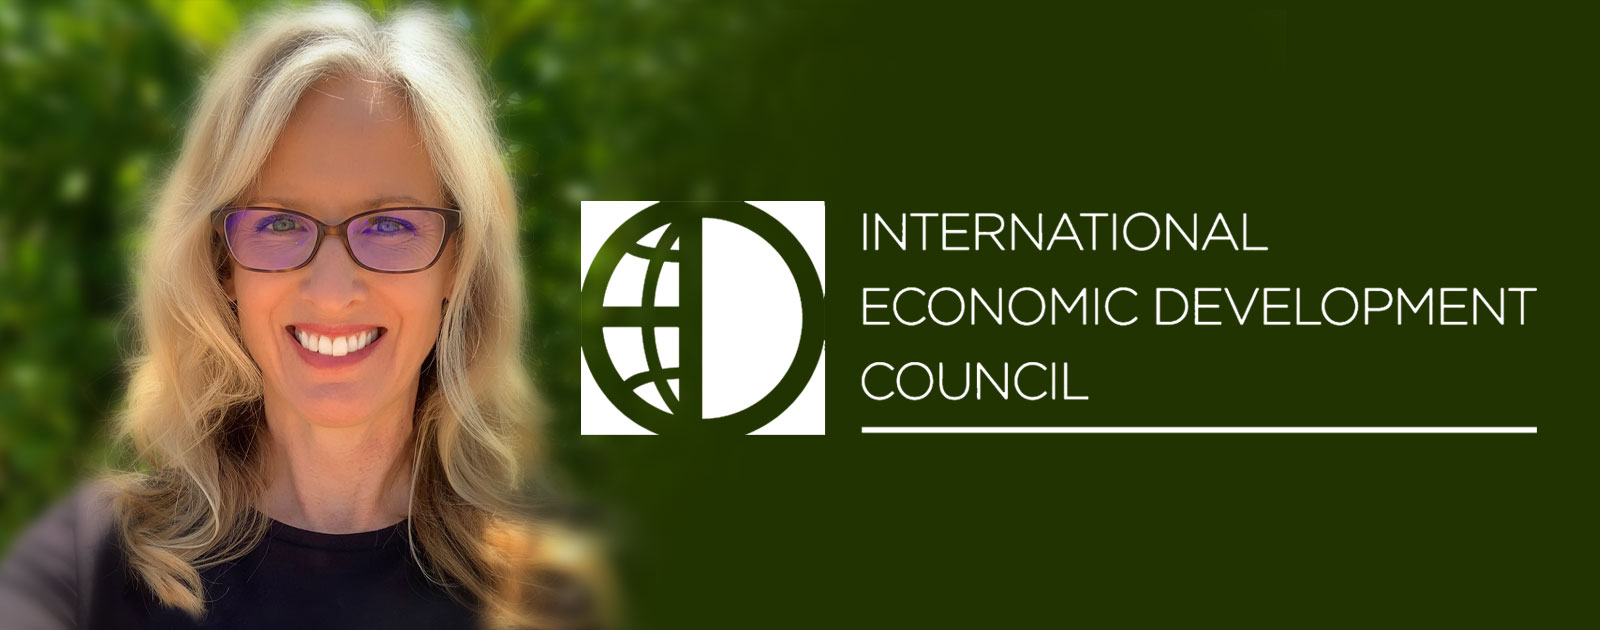 Laura James photo and IEDC logo